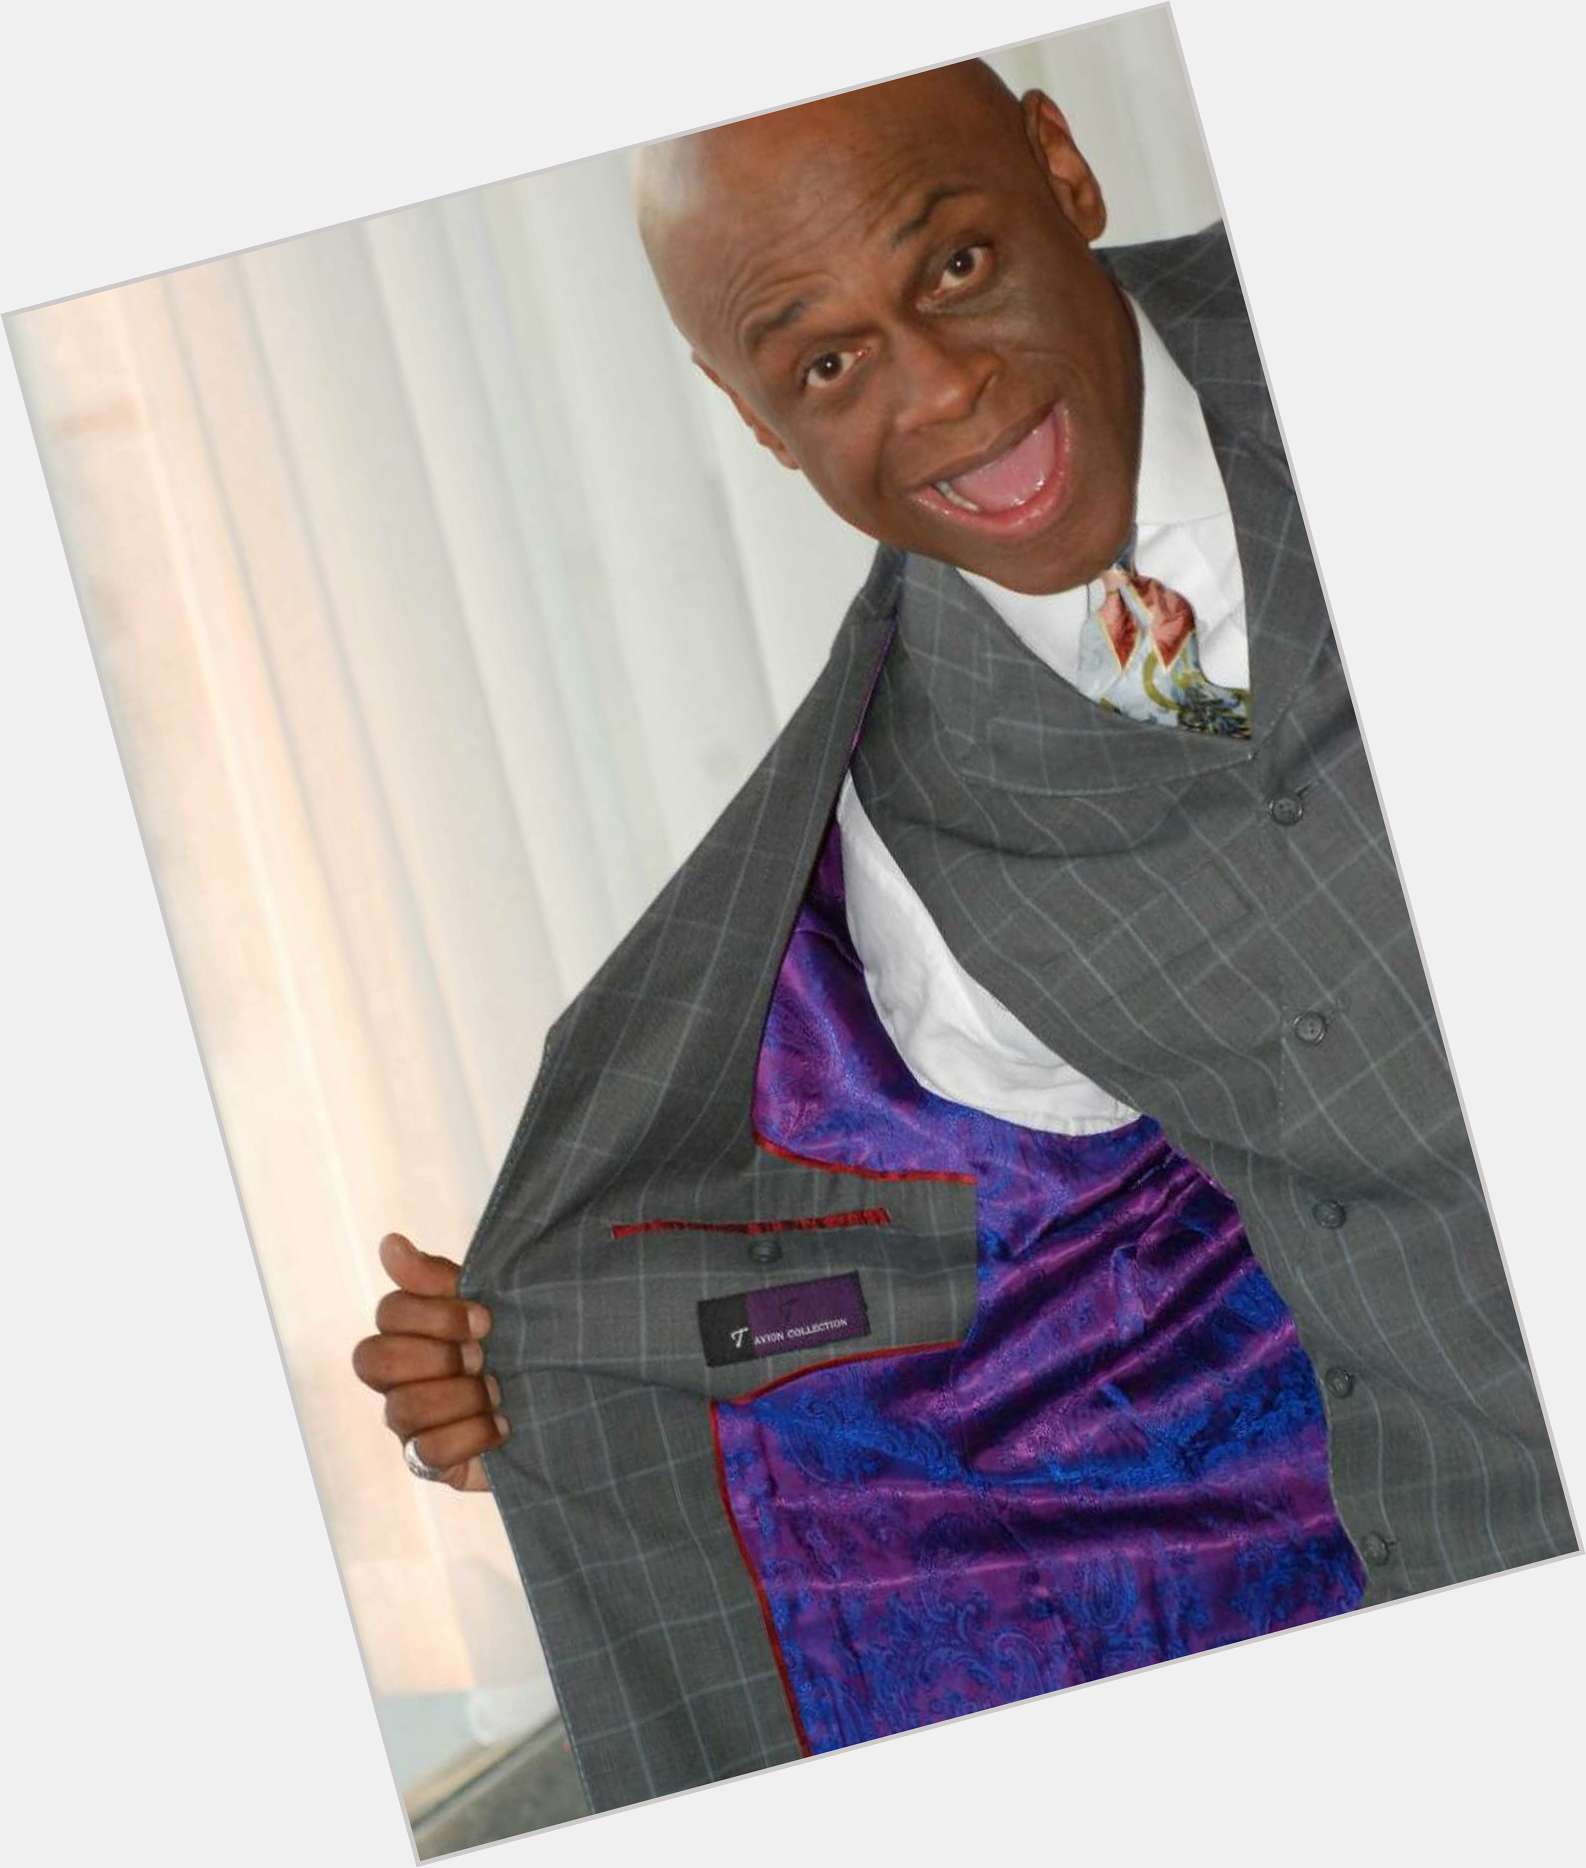 <a href="/hot-men/michael-colyar/is-he-joke-racist">Michael Colyar</a> Average body,  bald hair & hairstyles